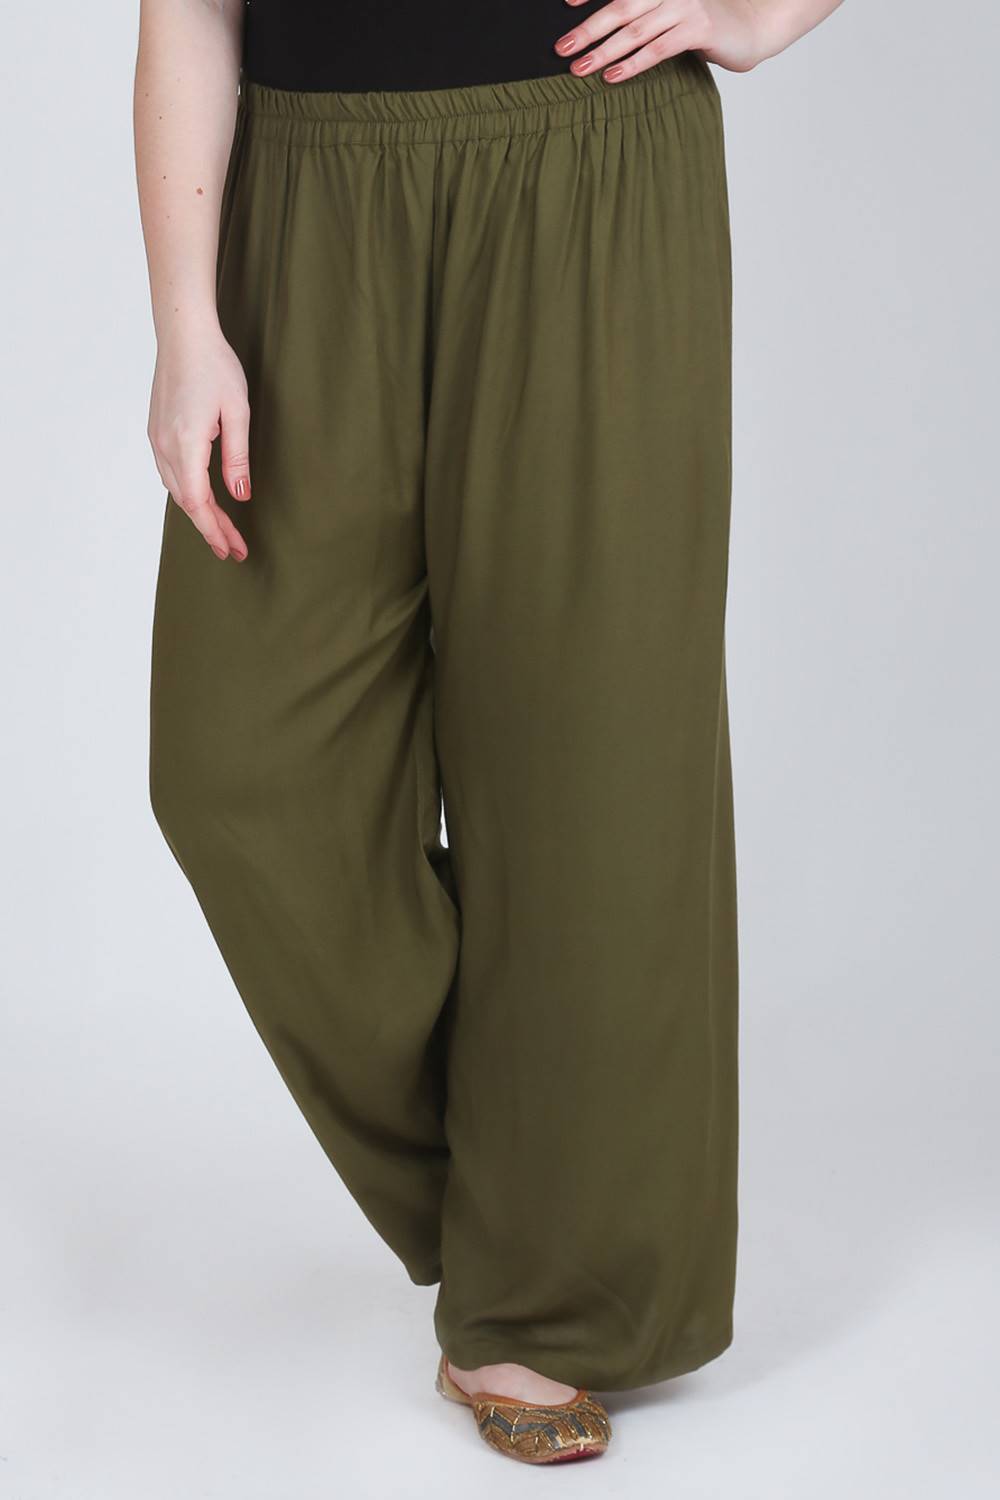 Green lycra palazzo pant for casual look  G3WFP46  G3fashioncom